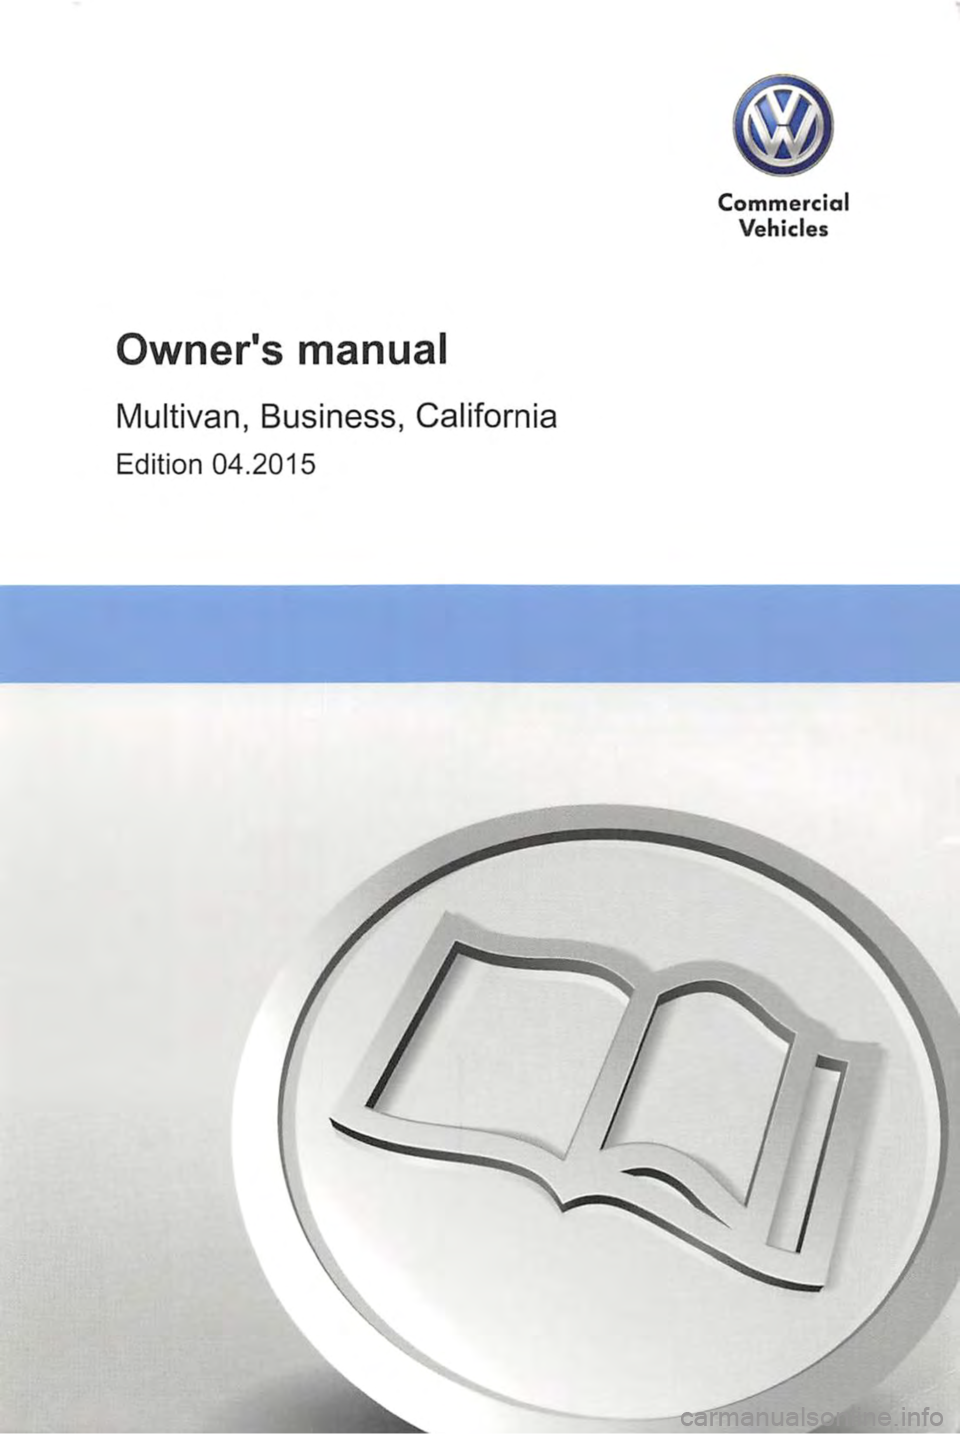 VOLKSWAGEN TRANSPORTER 2013  Owners Manual Owners manual 
Multivan, Business, California 
Edition 04.2015 
Commercial 
Vehicles  